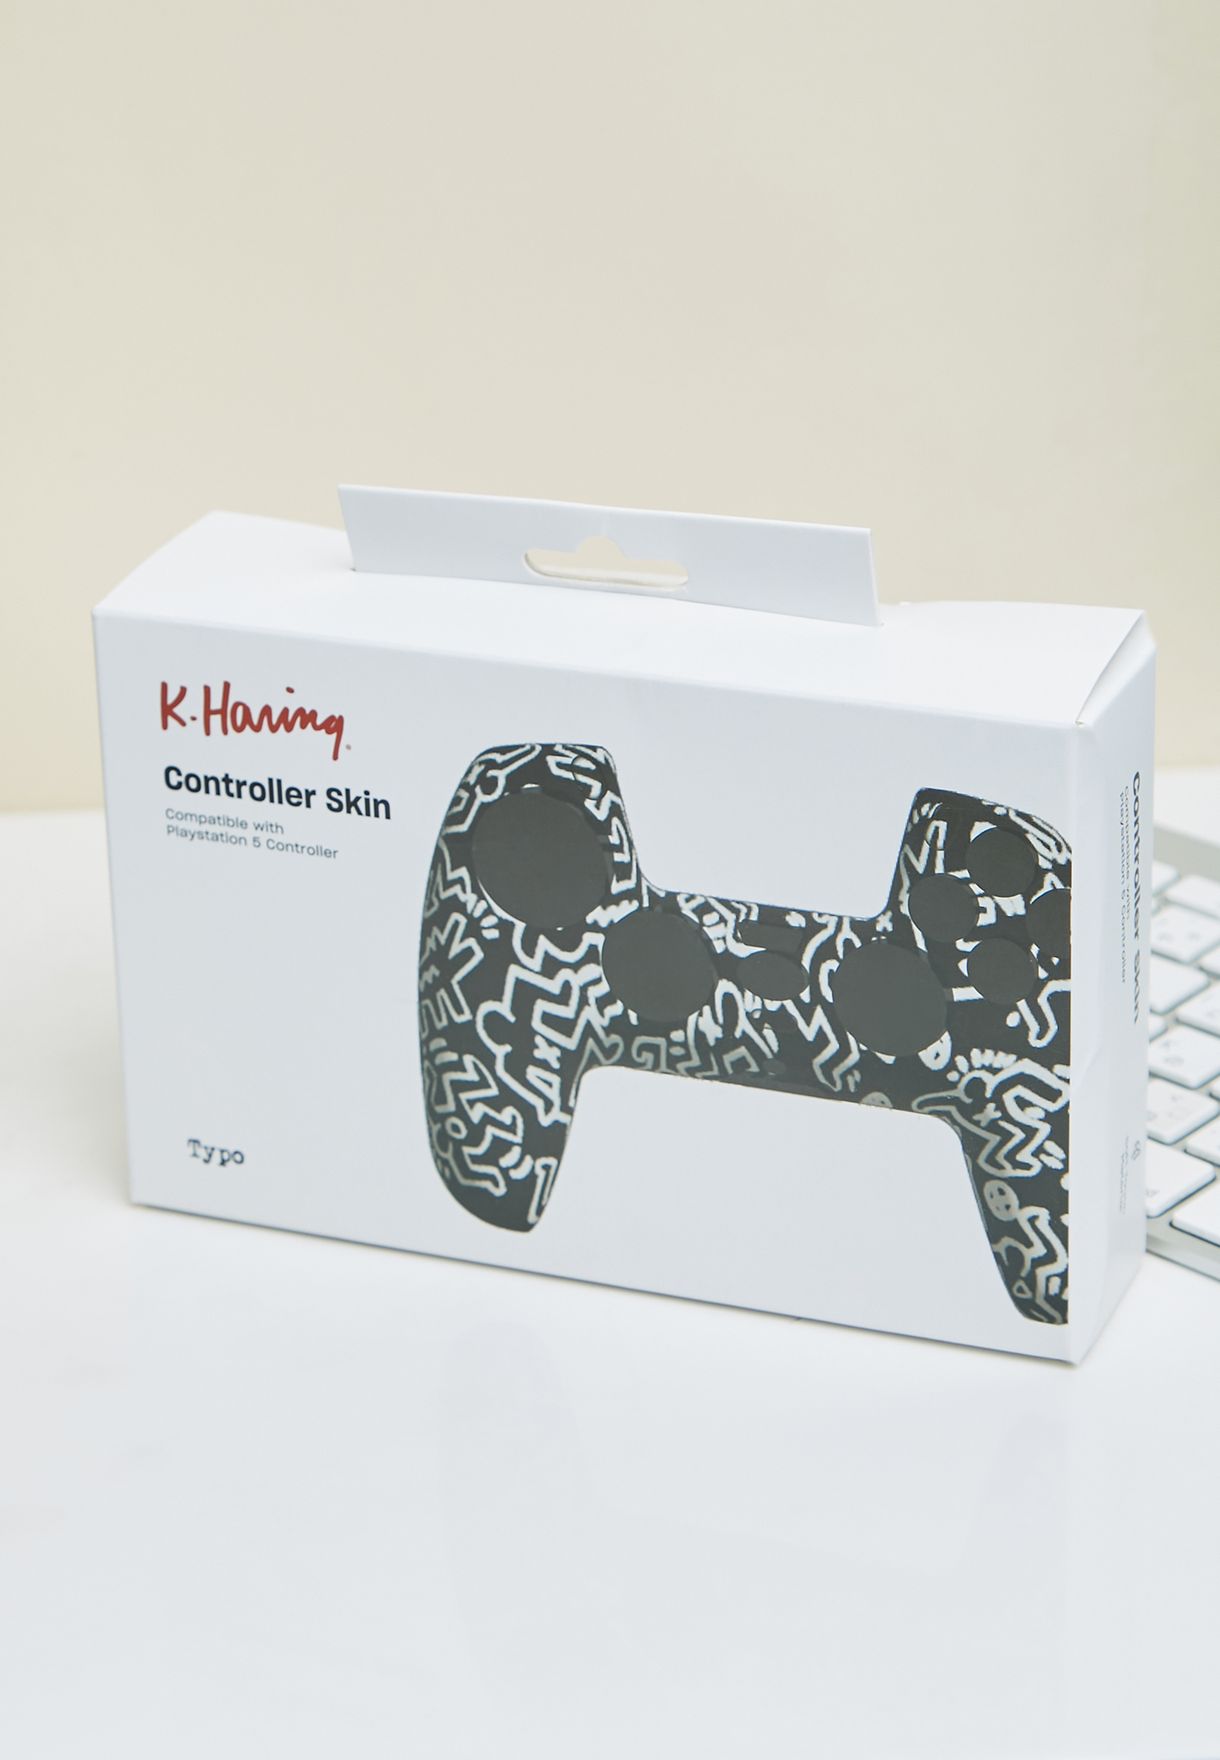 Ps5 Controller Skin